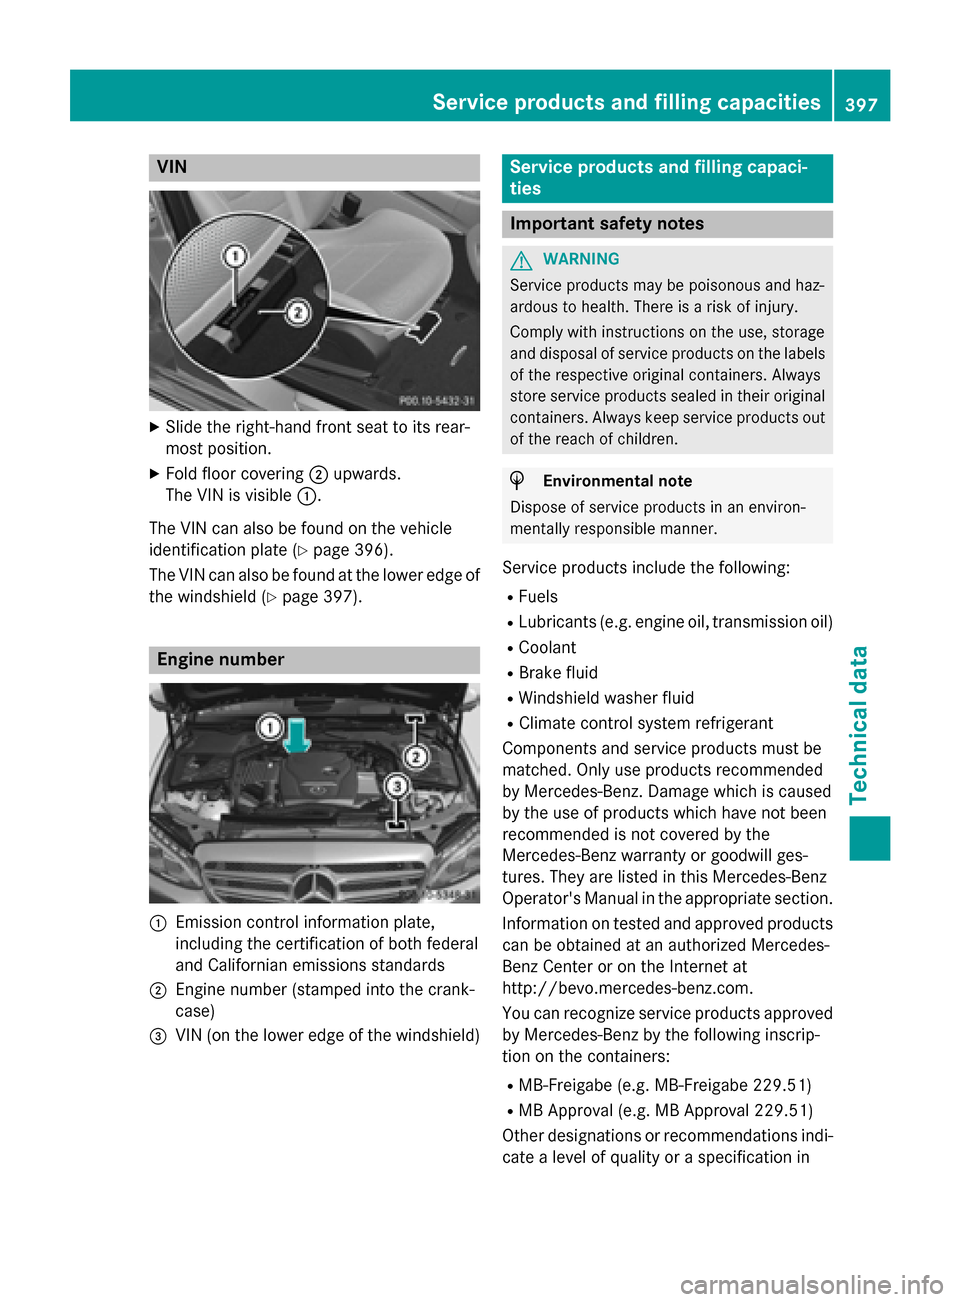 MERCEDES-BENZ C-Class SEDAN 2015 W205 Owners Manual VIN
X
Slide the right-hand front seat to its rear-
most position.
X Fold floor covering 0044upwards.
The VIN is visible 0043.
The VIN can also be found on the vehicle
identification plate (Y page 396)